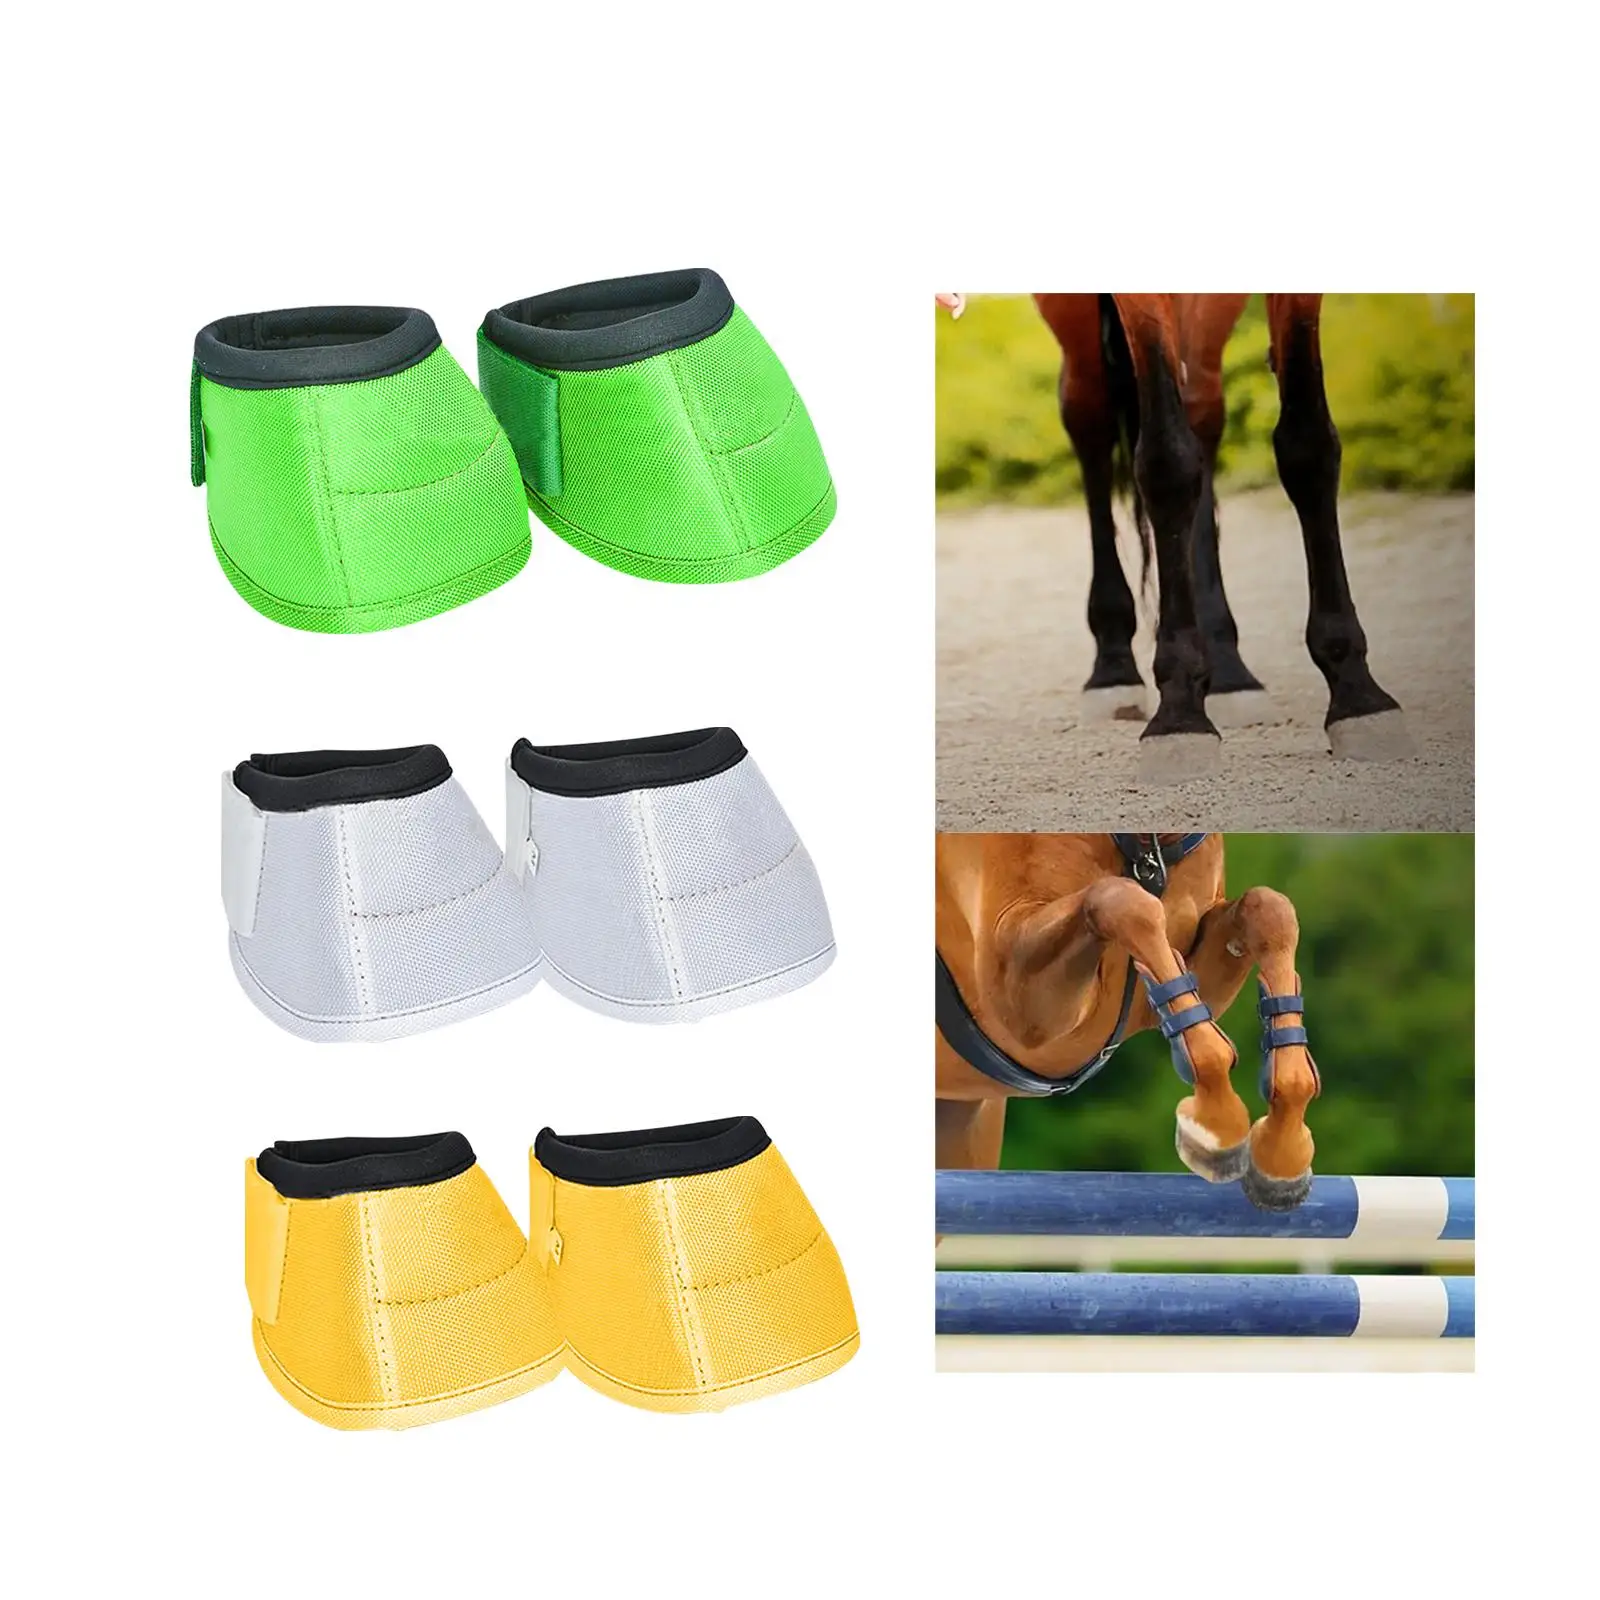 2Pcs Horse Bell Boots Horse Care Boot with Loop Closure Lightweight Easily Put on and Take Off Wear Resistant for Everyday Use